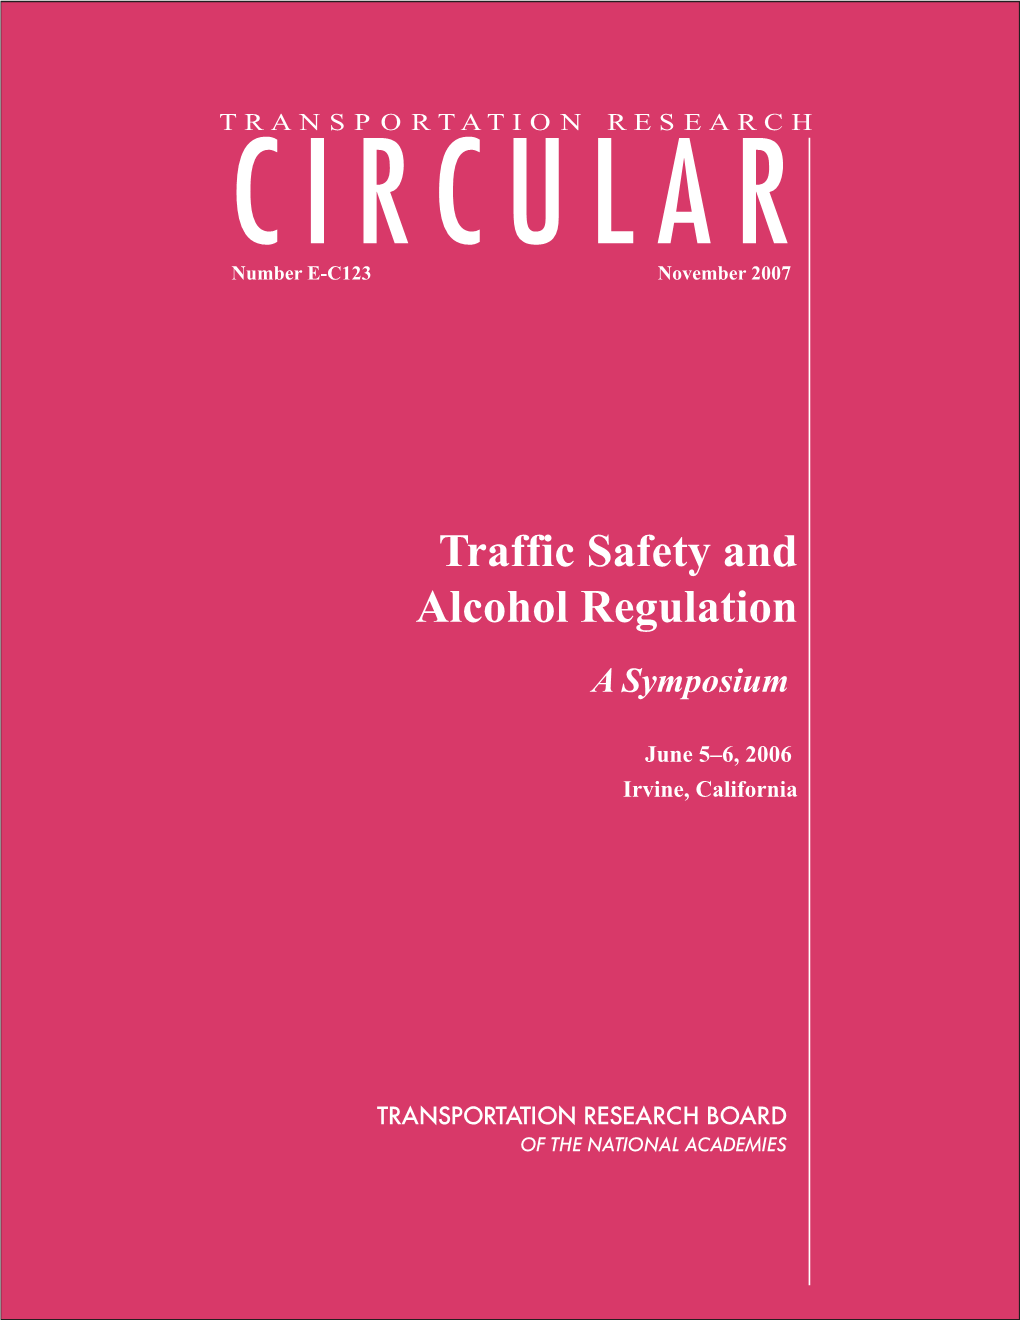 Traffic Safety and Alcohol Regulation